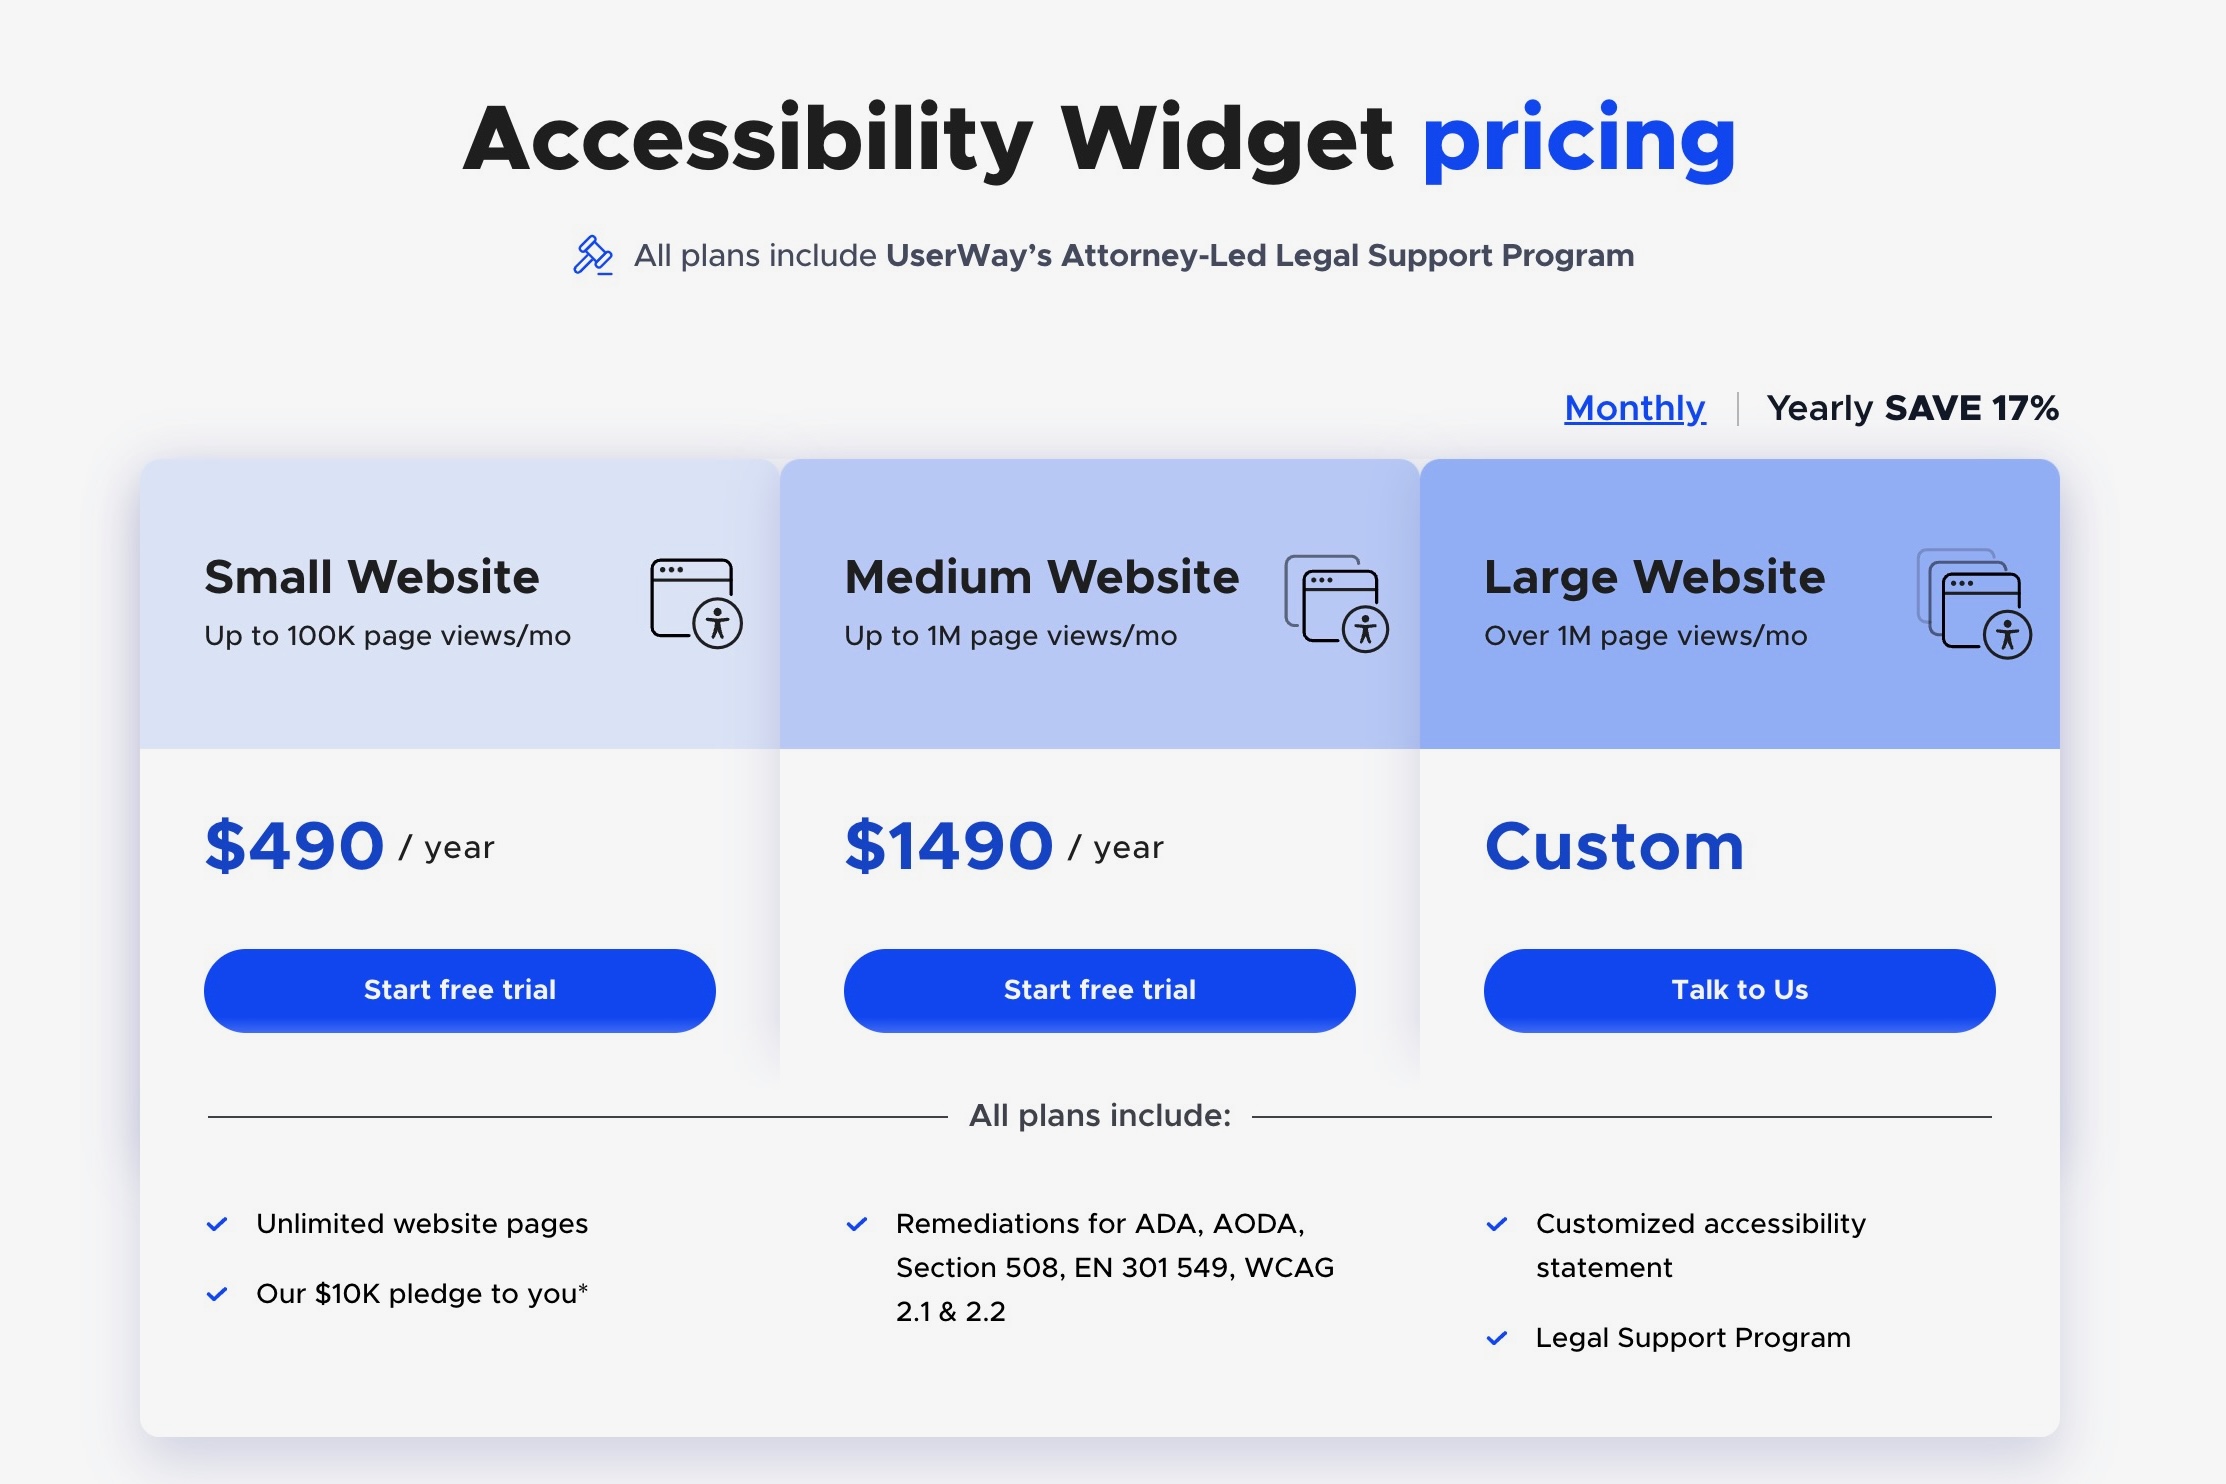 UserWay pricing.